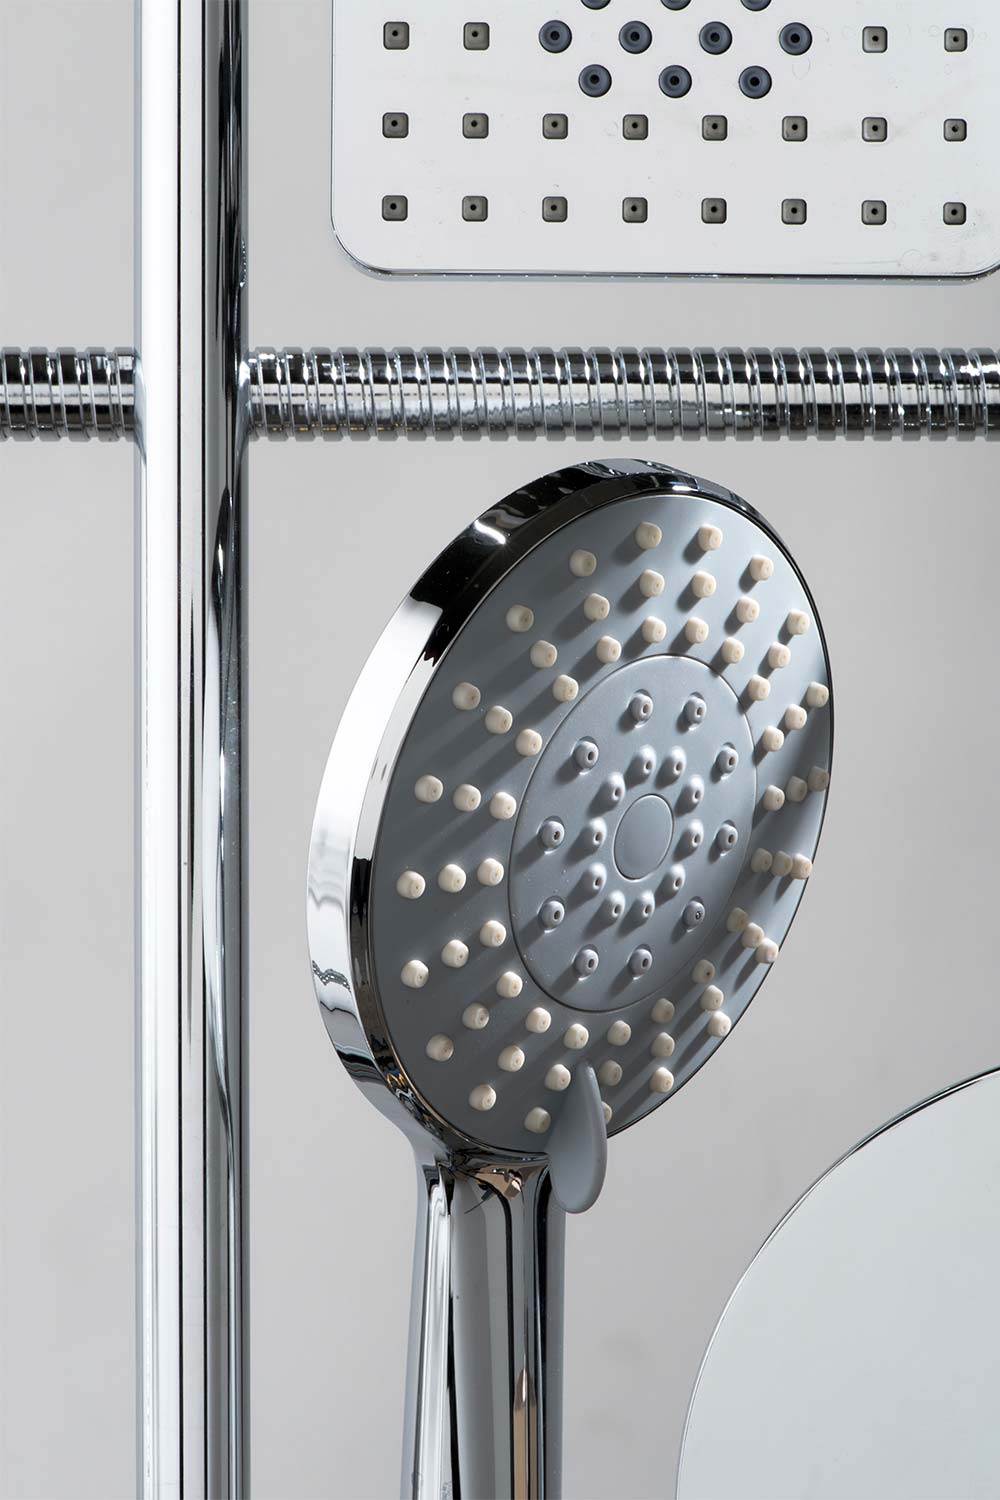 A shower rail, handset, hose and heads laid out in a graphic pattern.